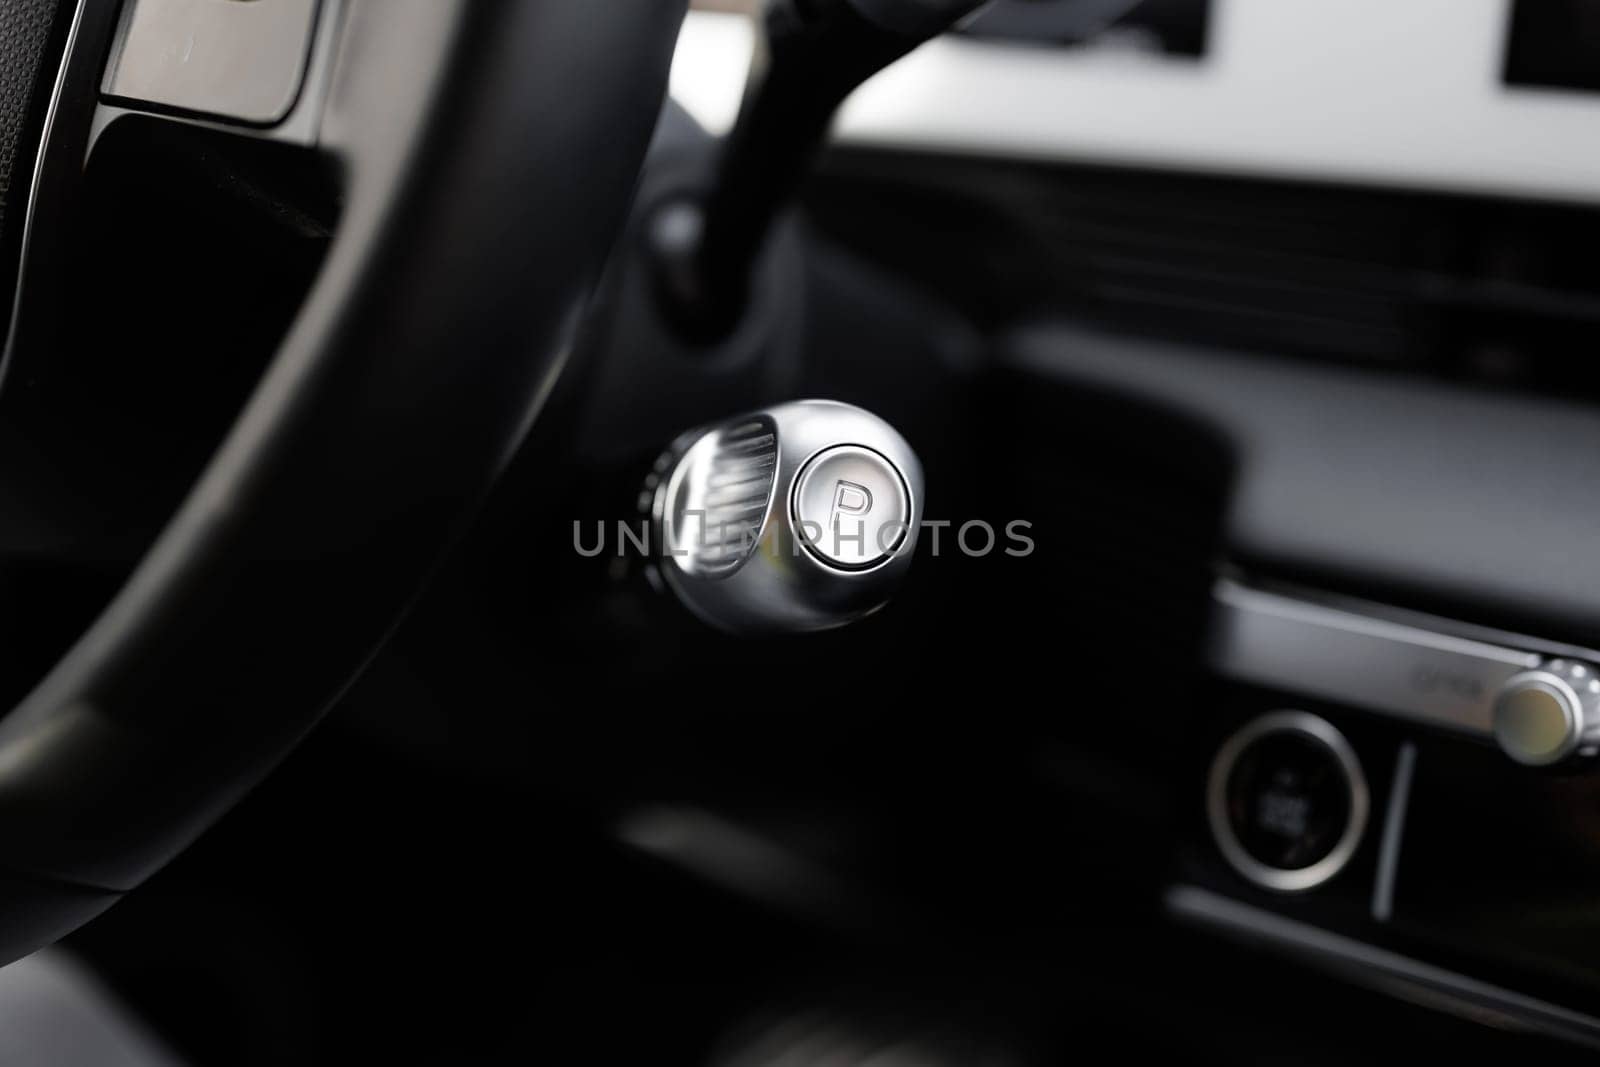 Handle of electric car gearbox control. Design details of minimalist concept of electric car - close-up details of automatic transmission and gear stick. Automatic gear lever and gear shift.